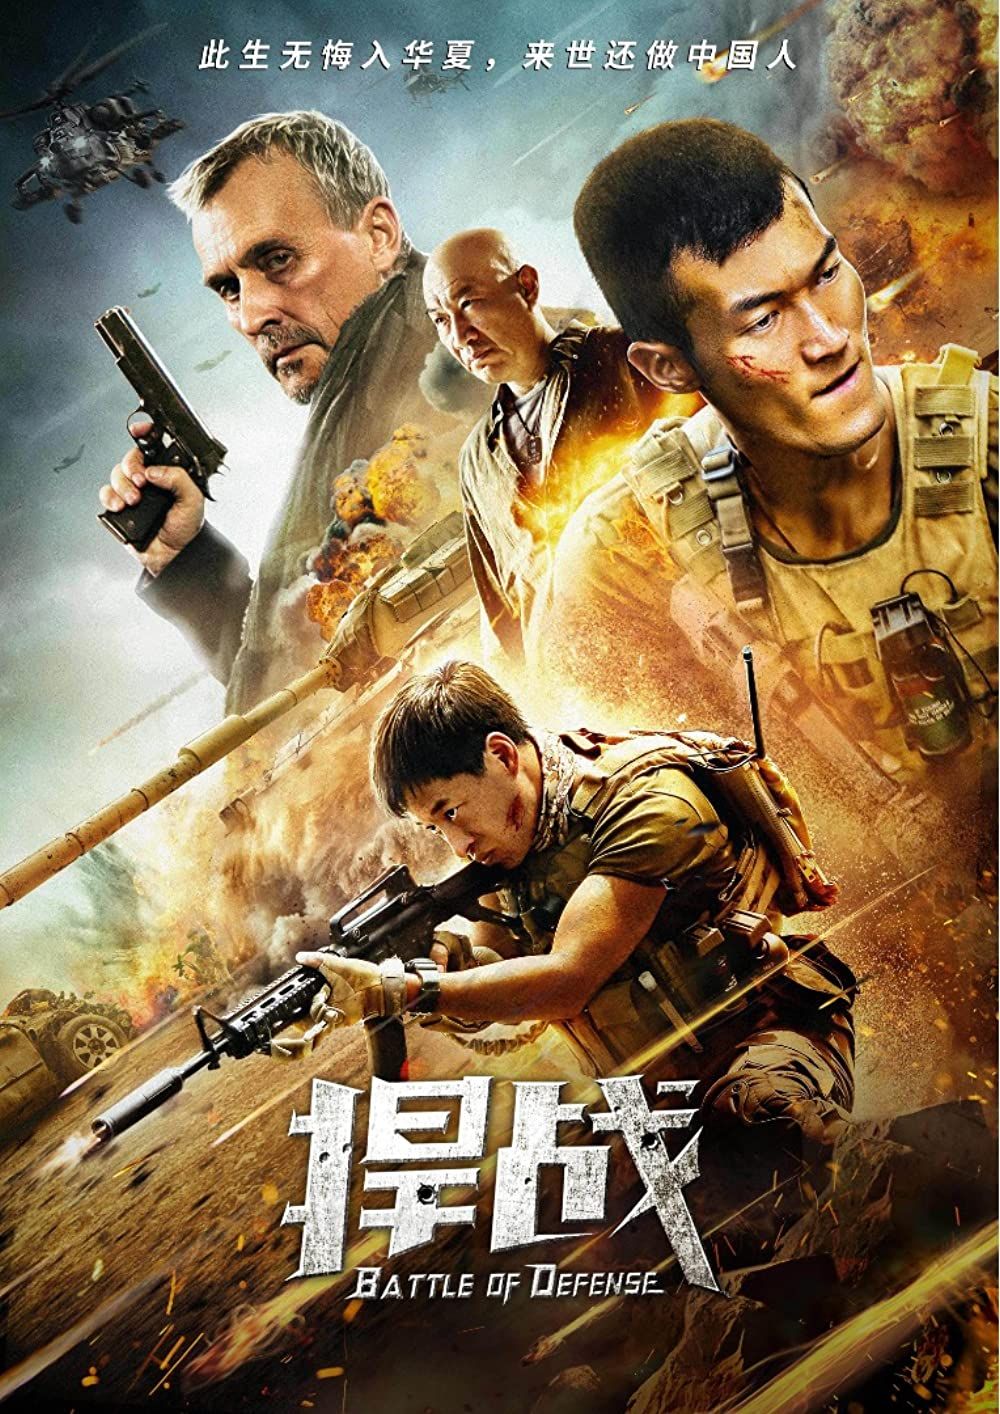 Battle of Defense (2020) Hindi ORG Dubbed BluRay download full movie